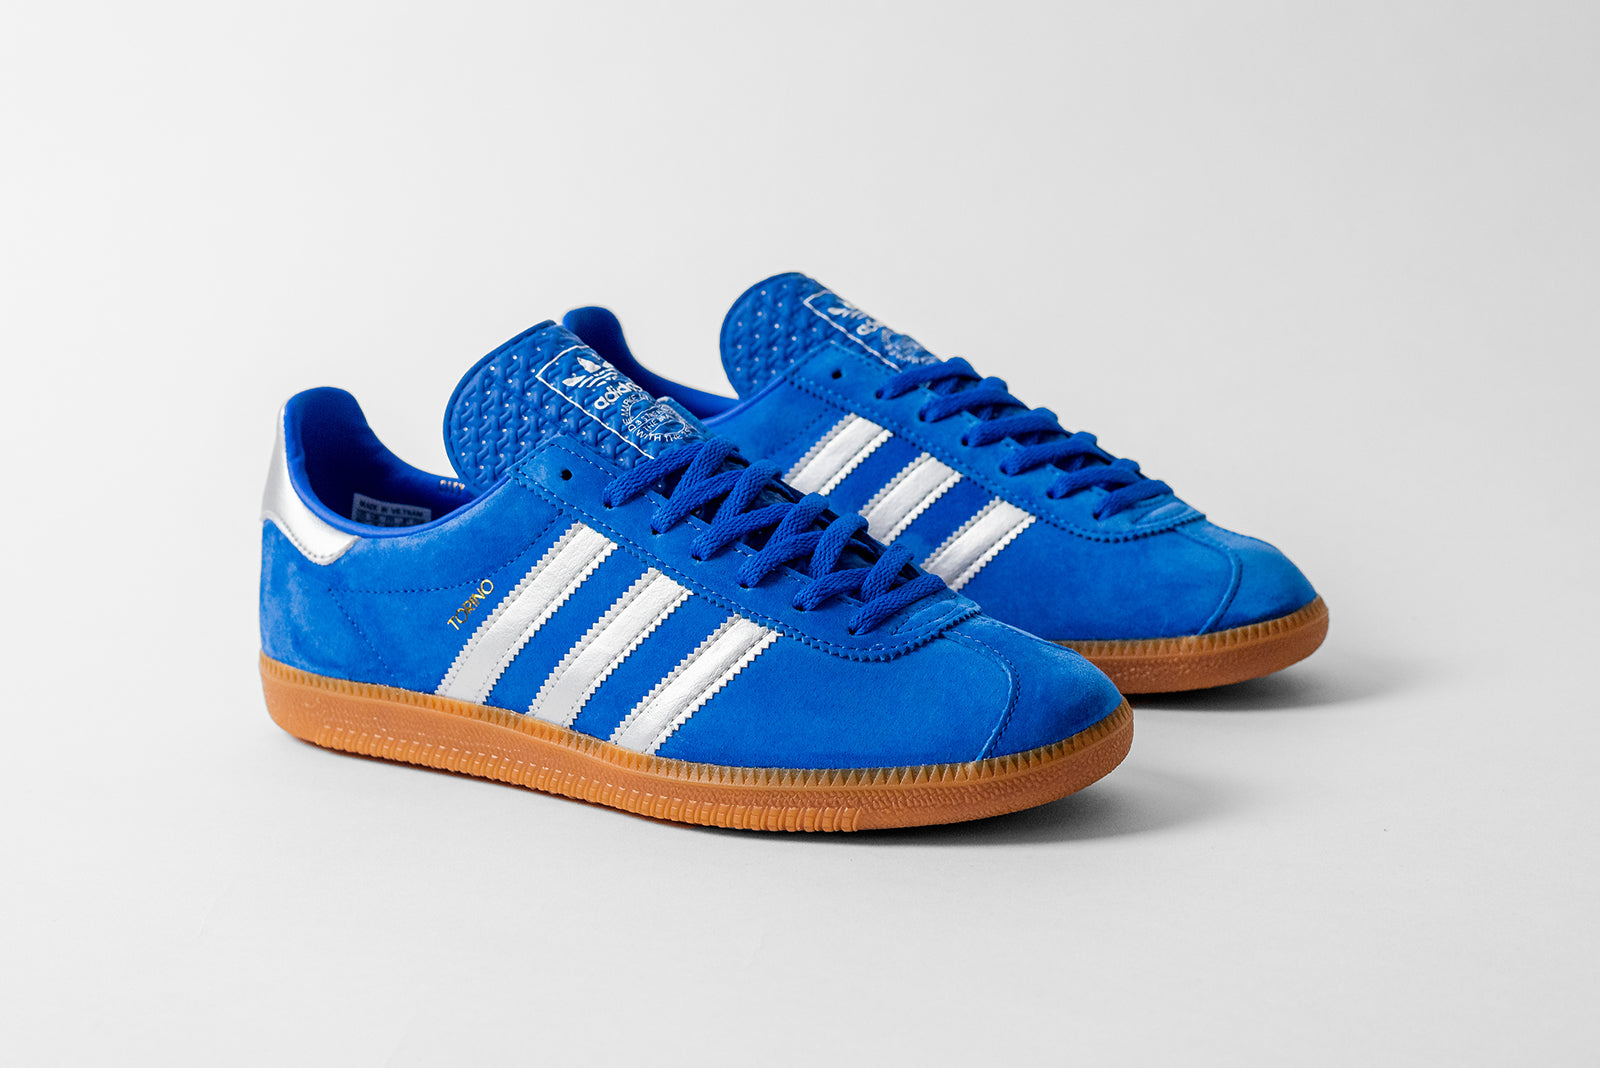 schot fiets Imperial google adidas la trainer jd sports store hours today